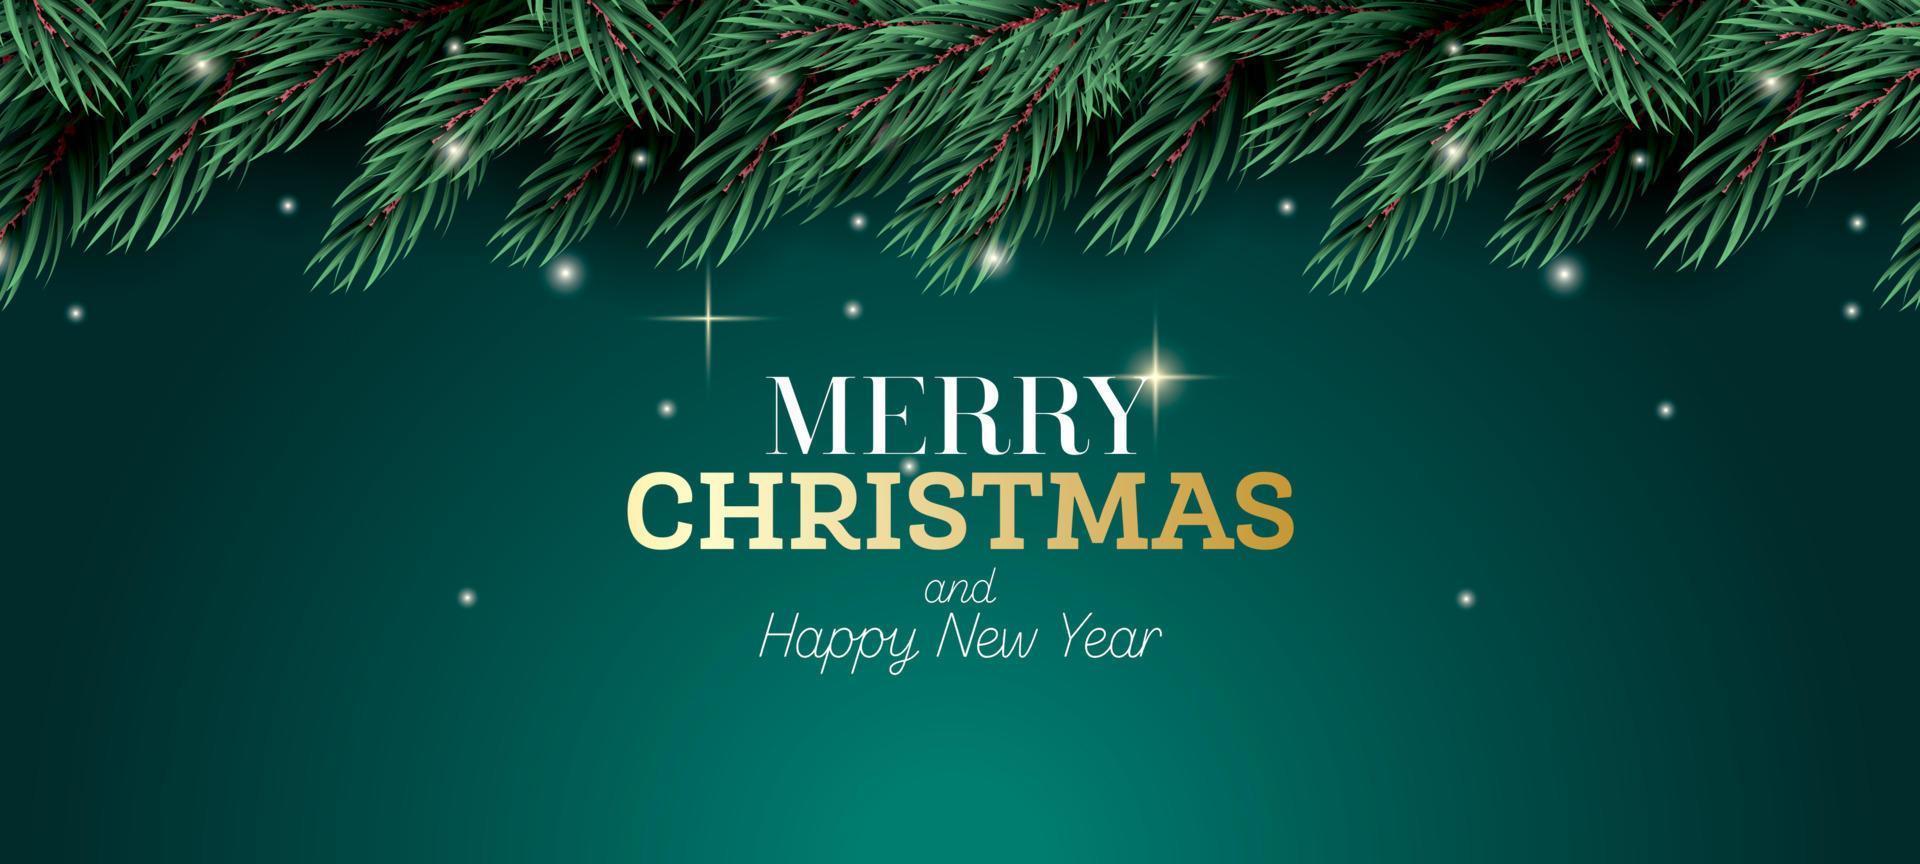 Fir Branch with Neon Lights on Green Background. Merry Christmas and Happy New Year. vector